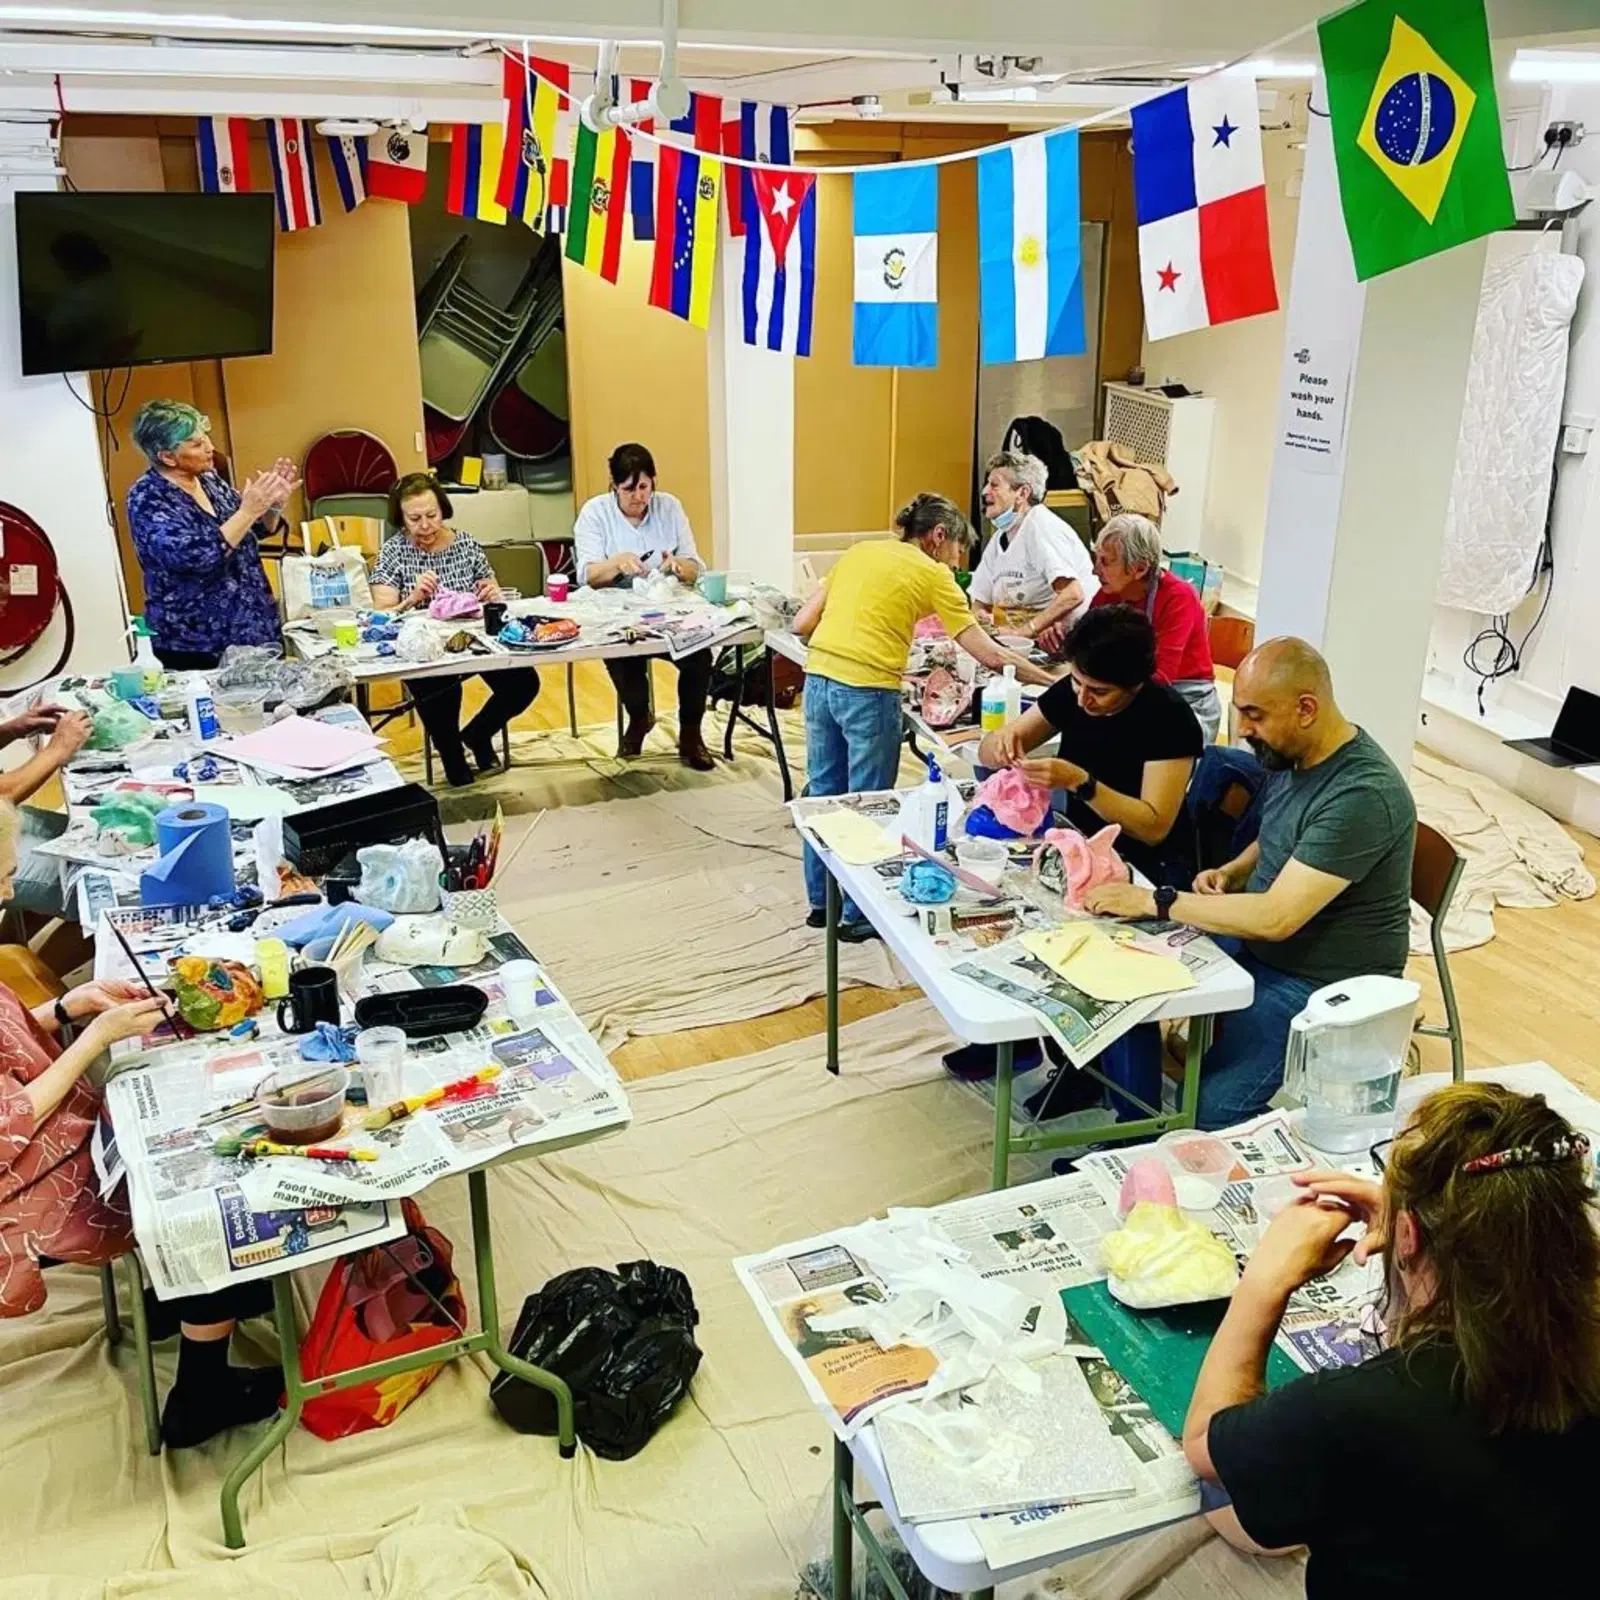 A vibrant art workshop in progress with participants of various ages focused on their craft, surrounded by colorful international flags hanging overhead, suggesting a culturally diverse or international event.